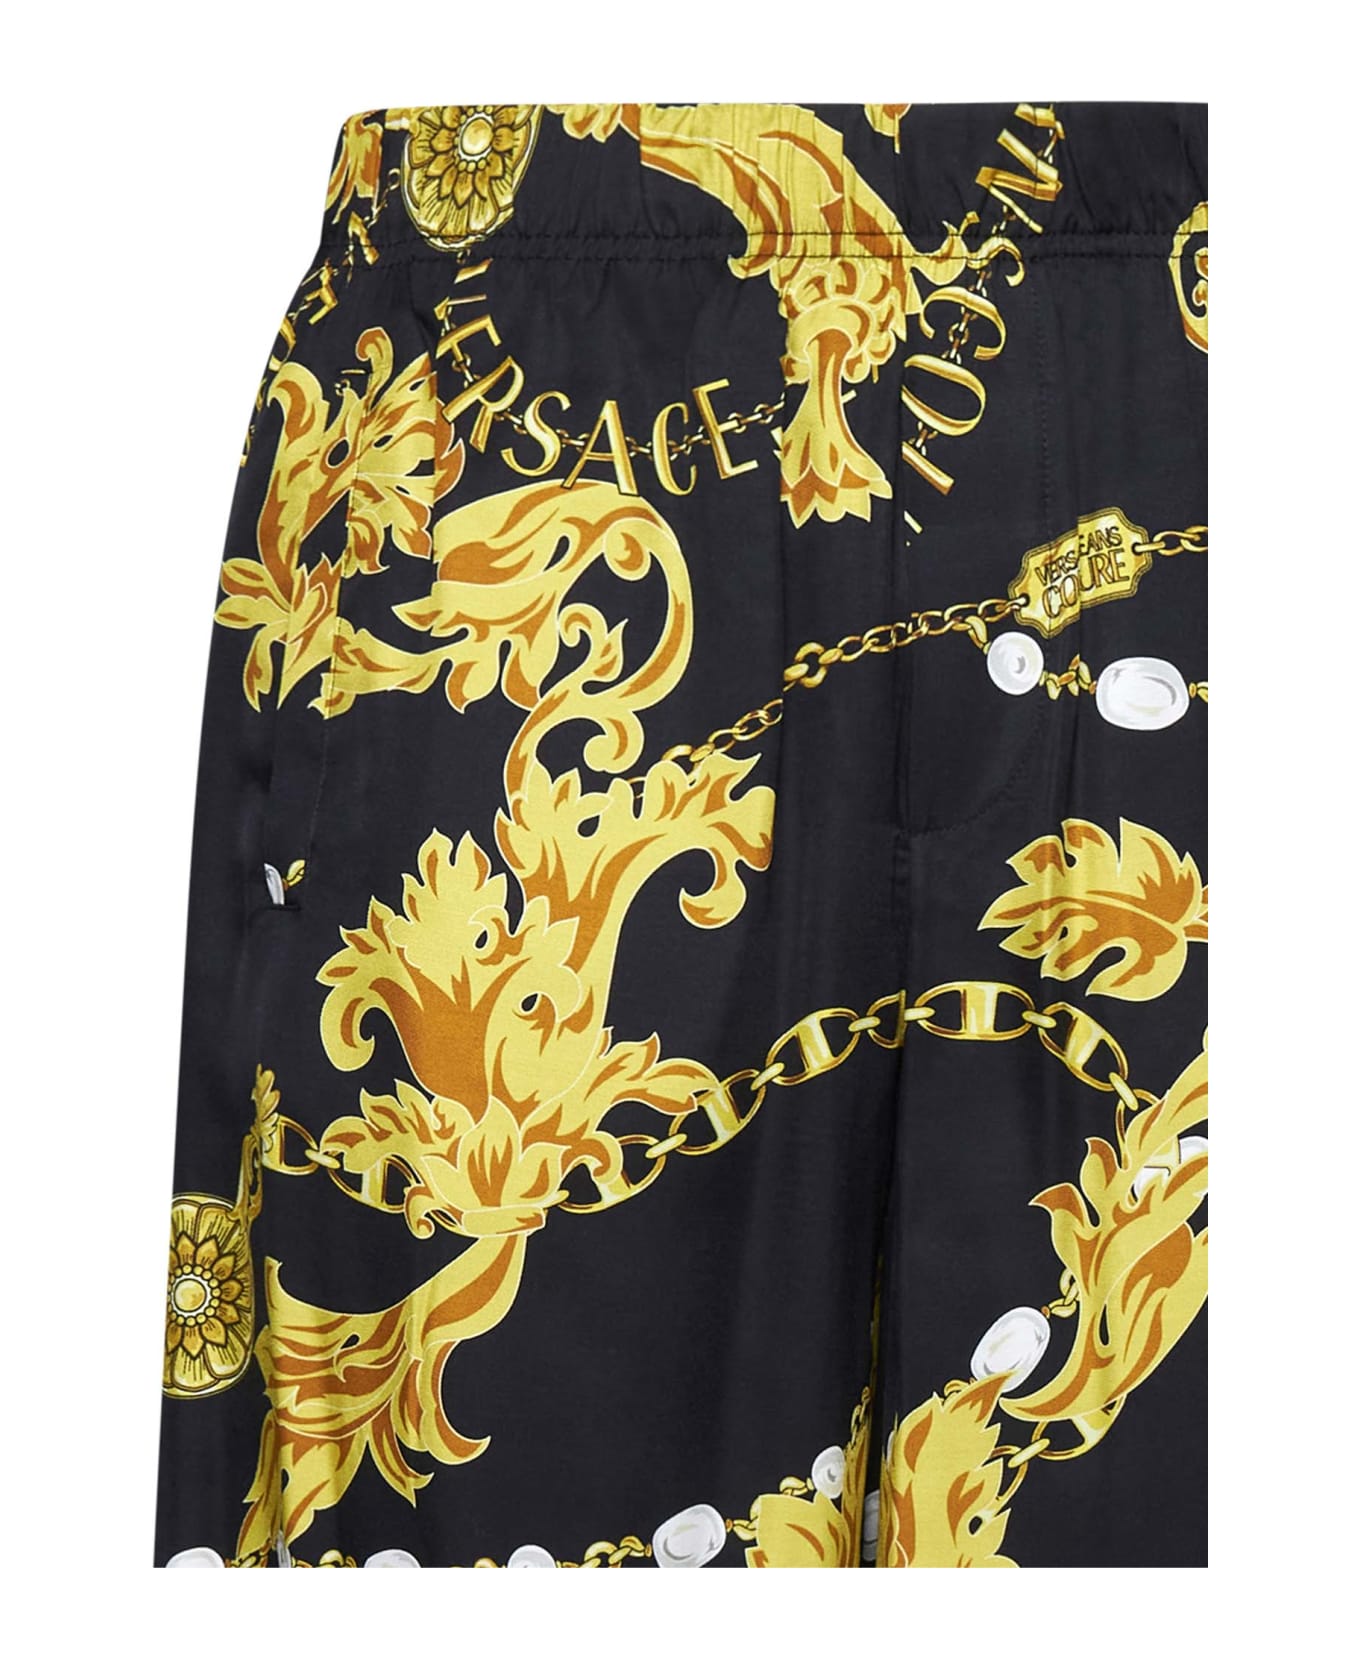 Versace Jeans Couture Chain Couture Bermuda Shorts - Black gold ショートパンツ